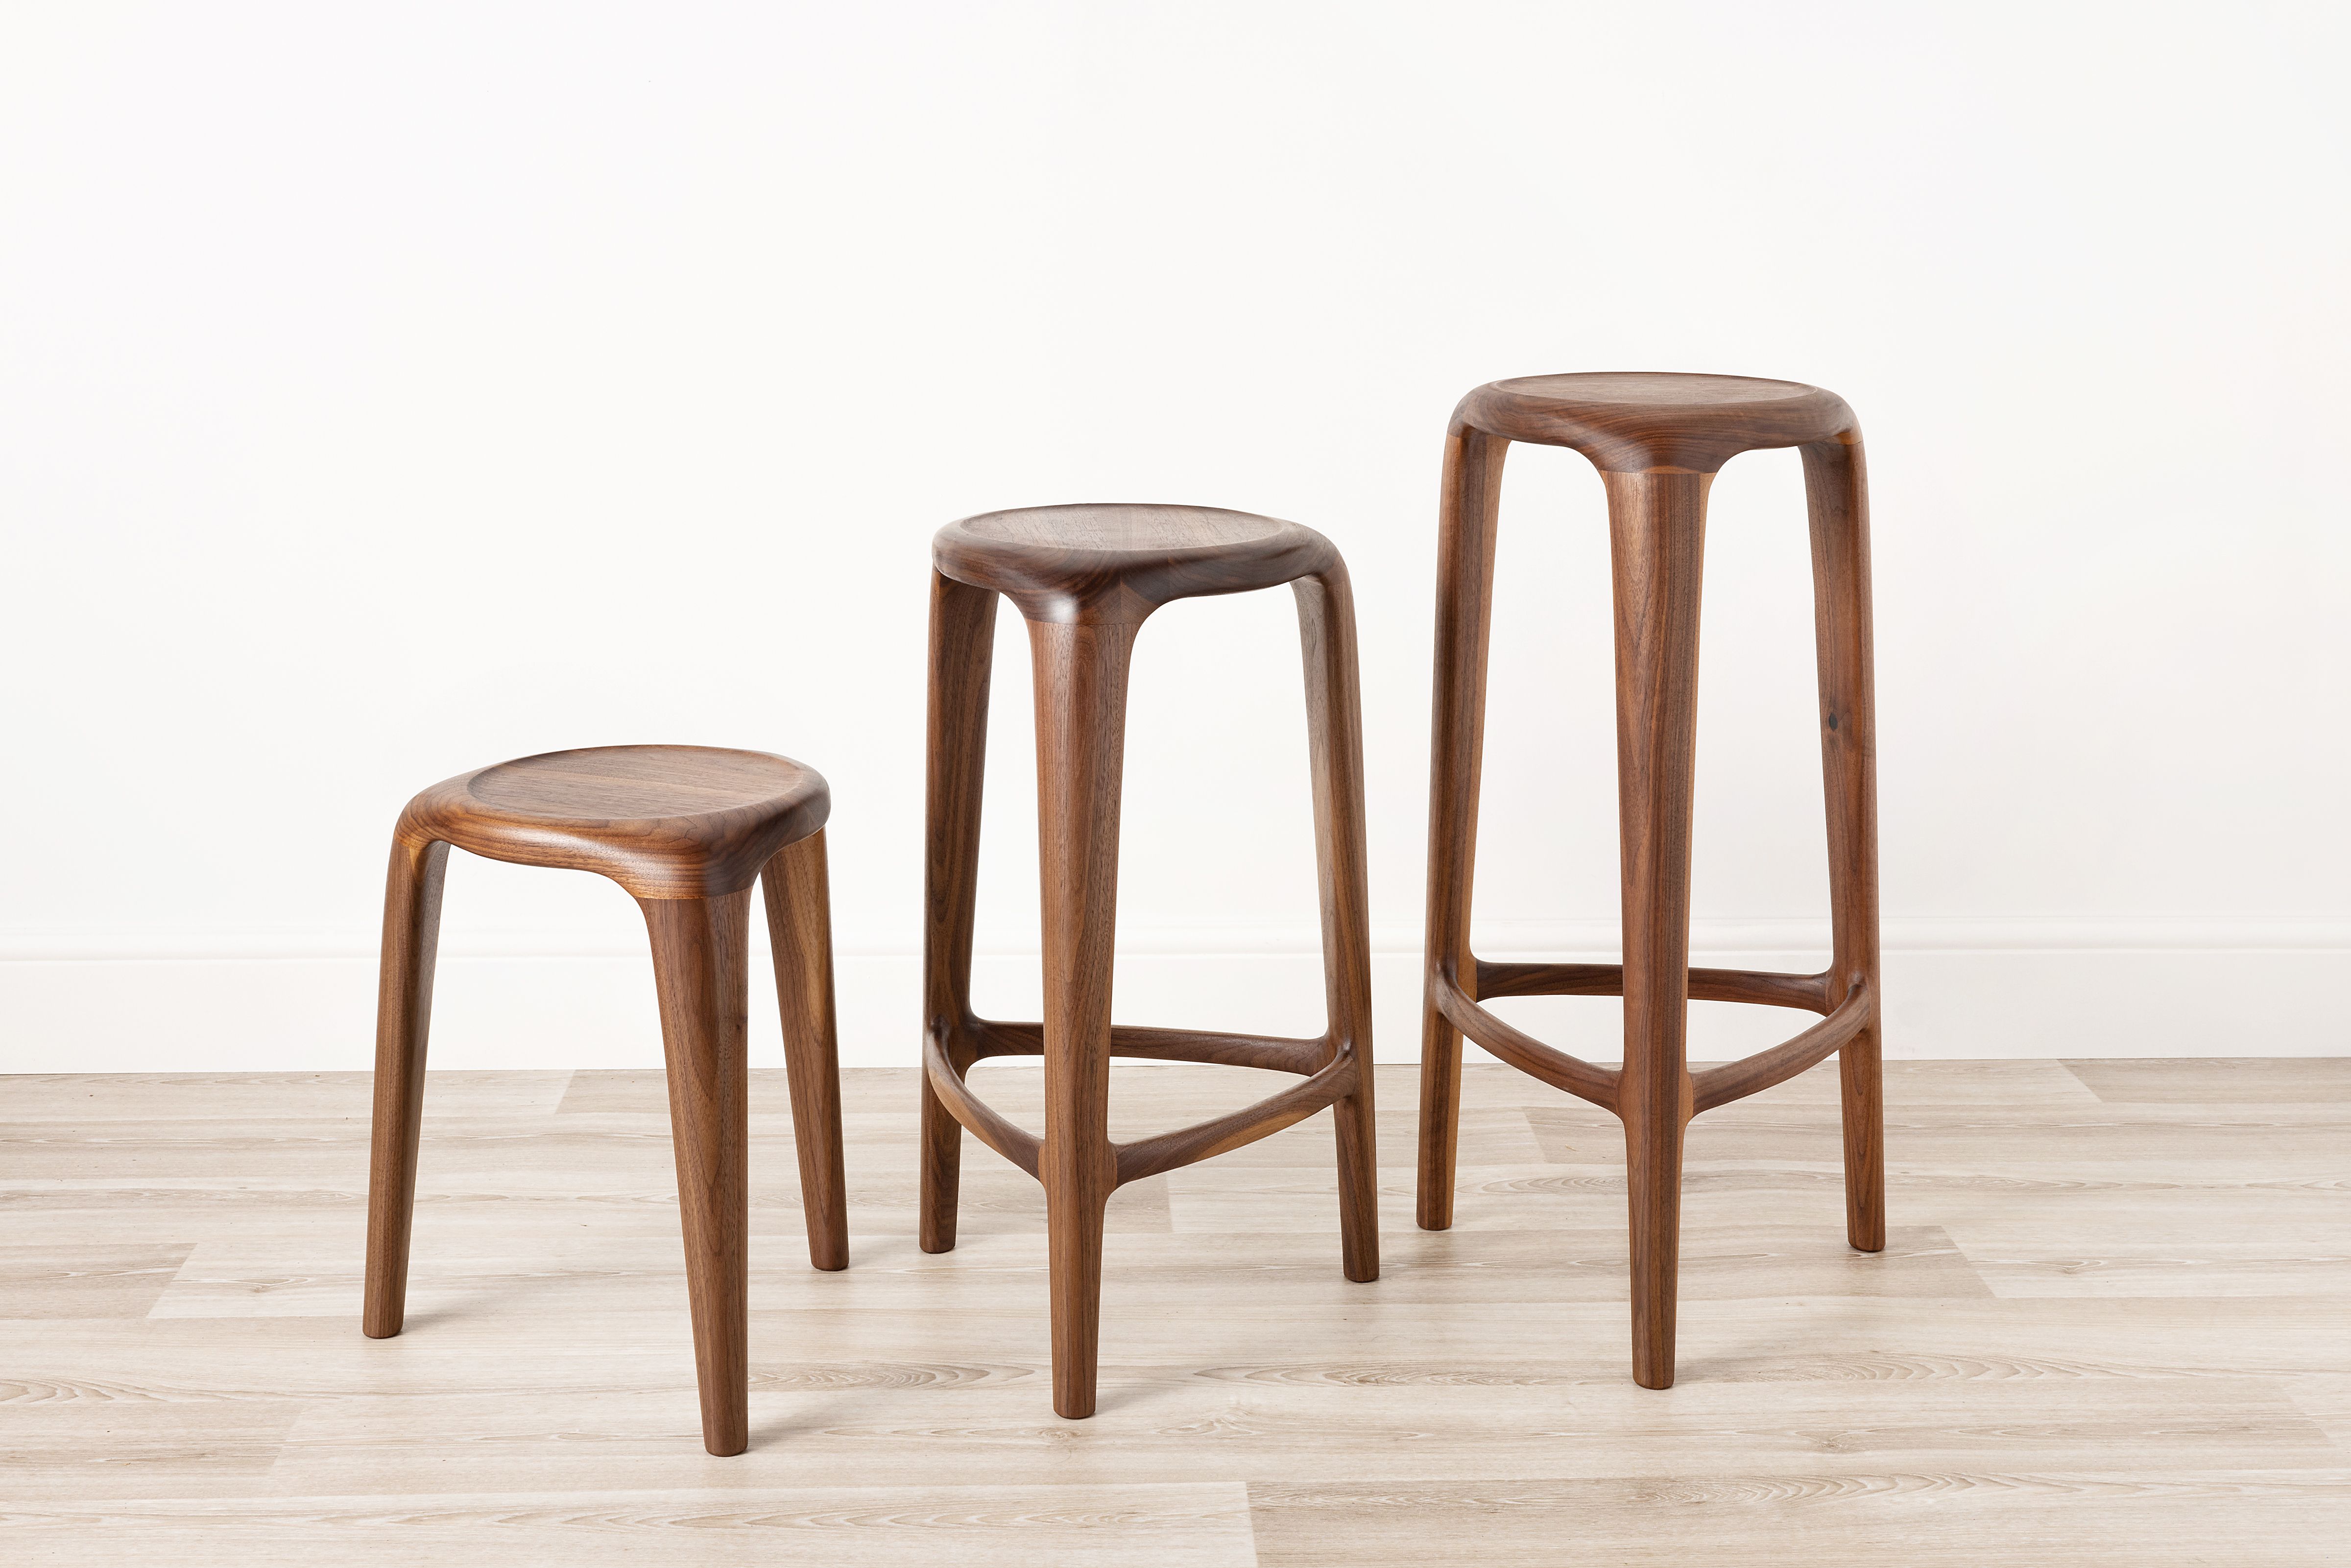 Yorkshire furniture company to unveil innovative sculptural wood stool collection at Clerkenwell Design Week